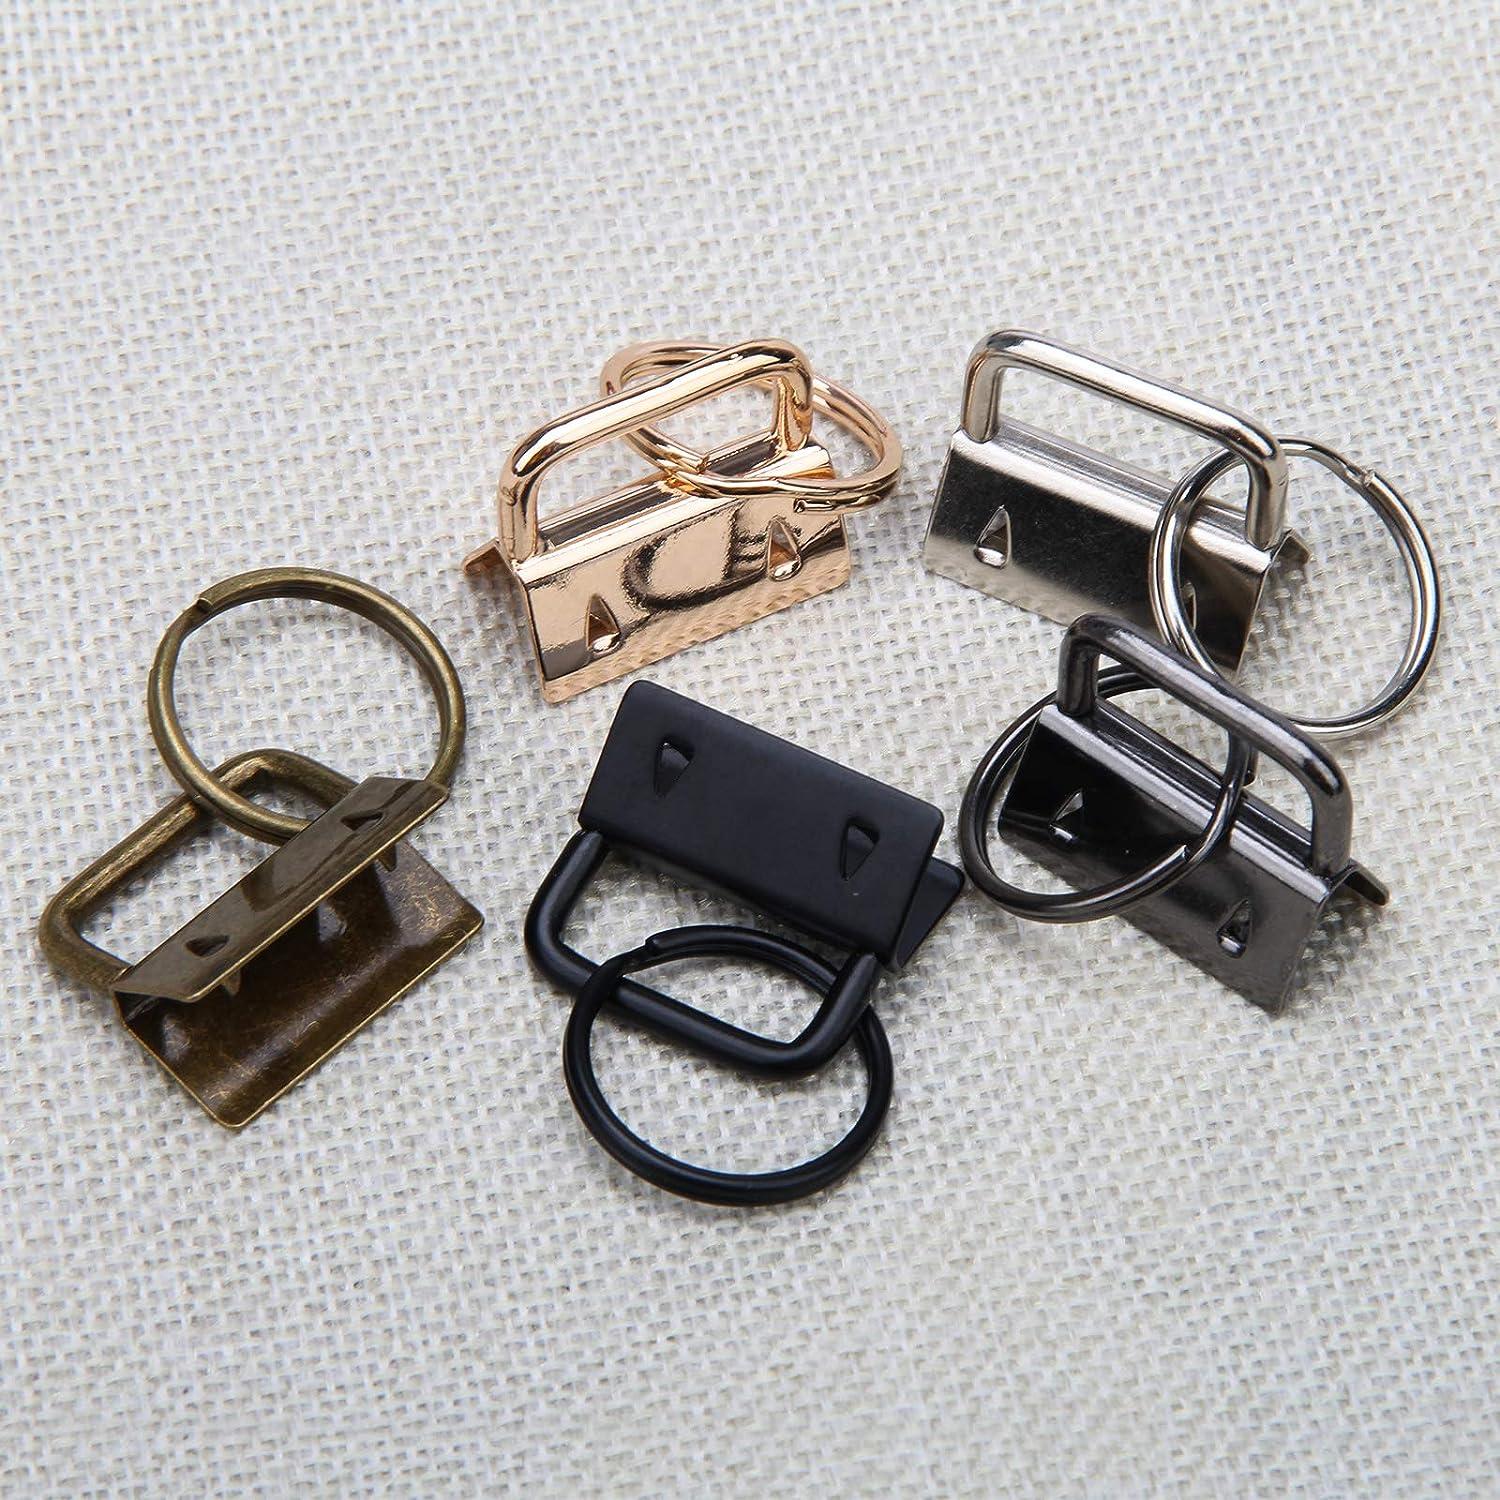 25mm 4 Color Key Fob Keychain Hardware With Pliers Tool Set For Wristlet  Clamp Key Lanyard Making Install Supplies Hardware Tool - Buckles & Hooks -  AliExpress